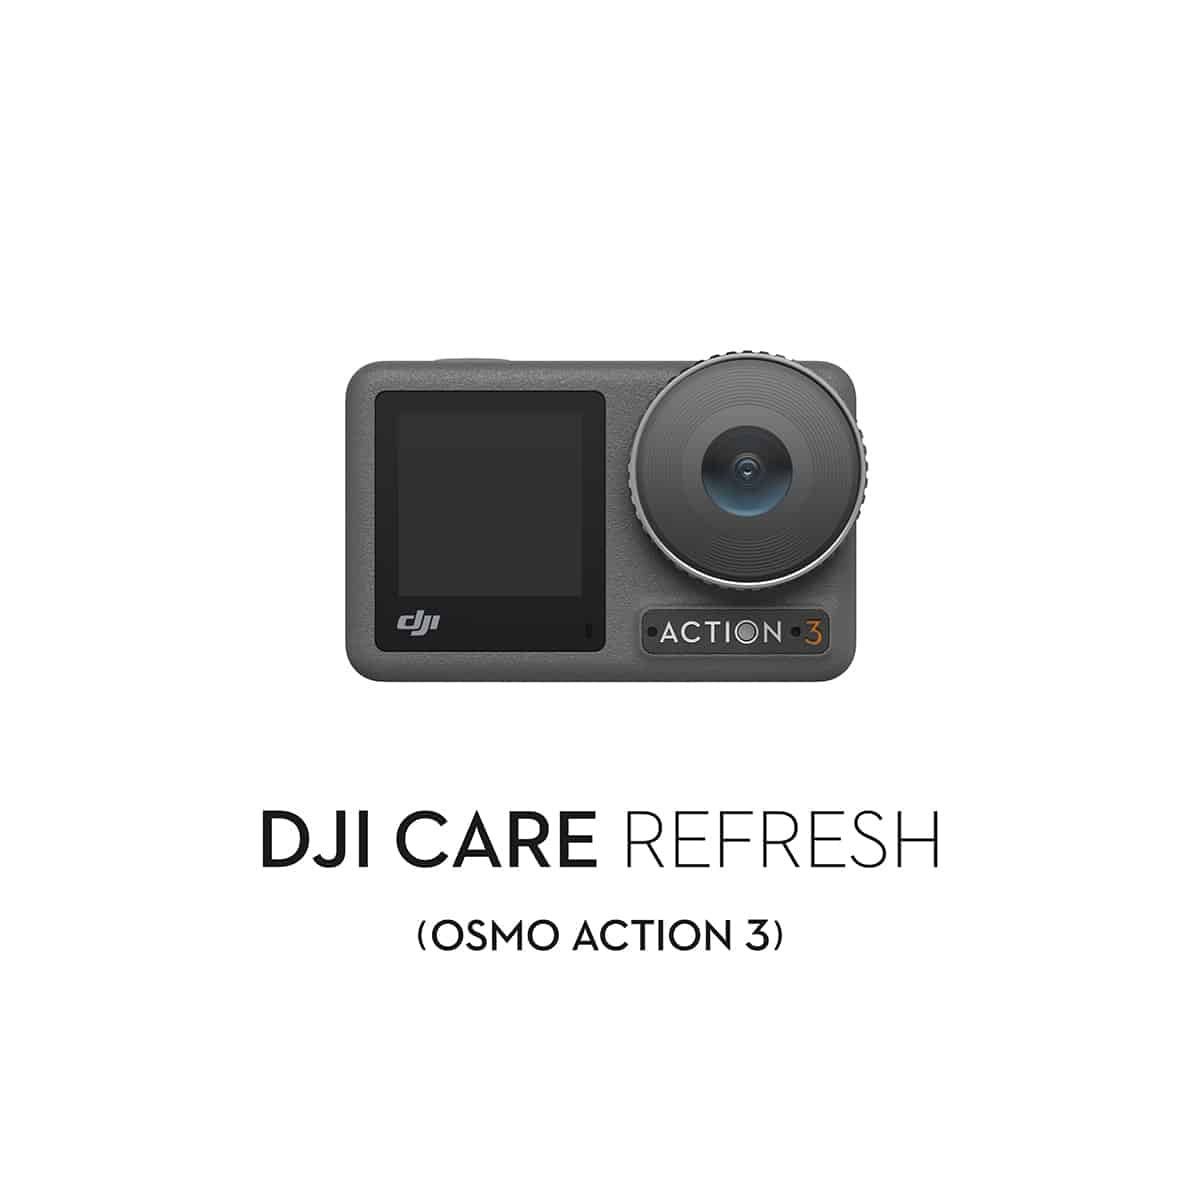 DJI Care Refresh Osmo Action 3 - 2 year